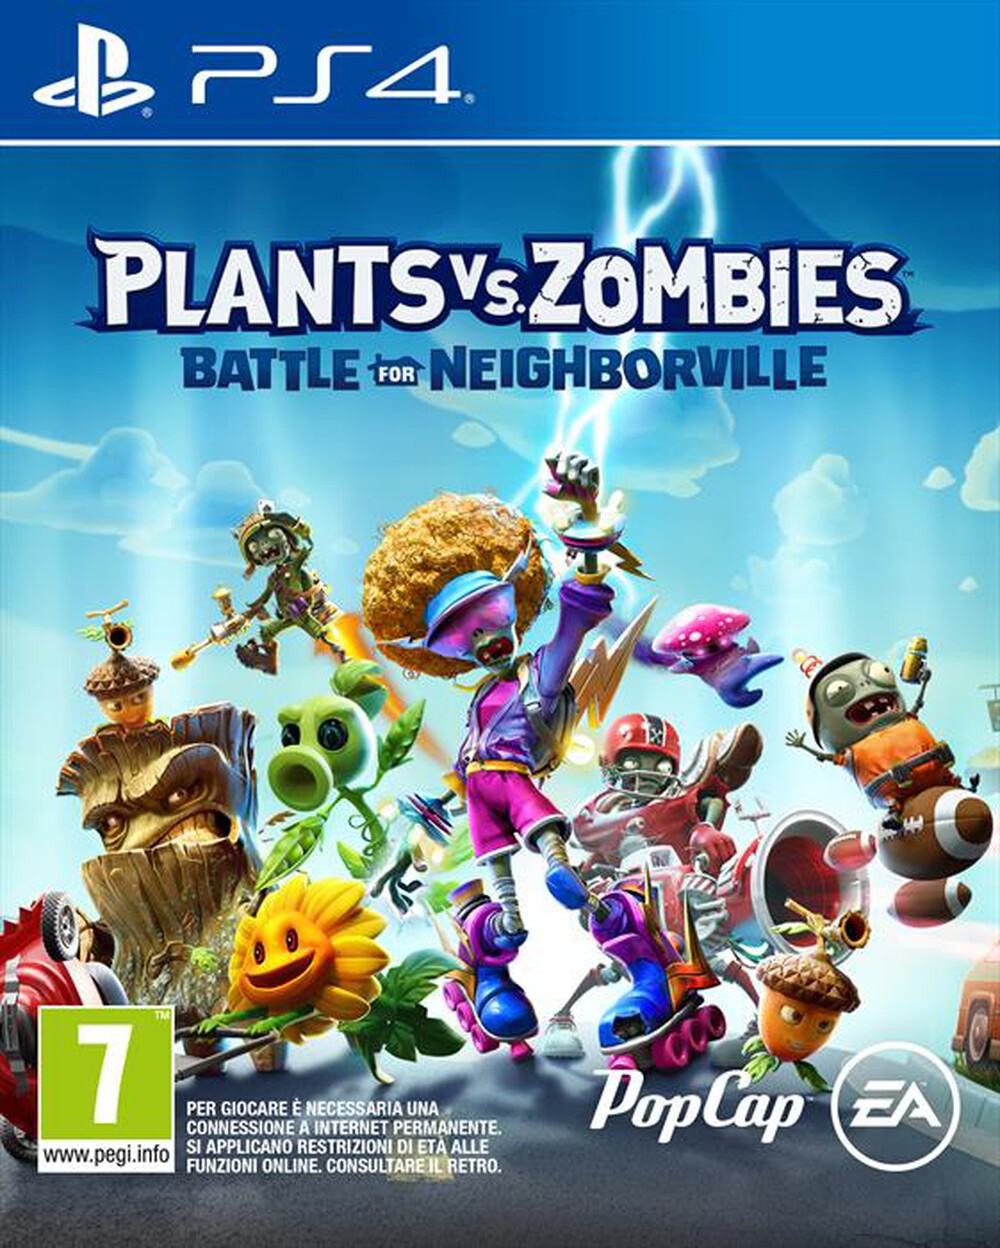 "ELECTRONIC ARTS - PLANTS VS ZOMBIES: BATTLE FOR NEIGHBORVILLE PS4"